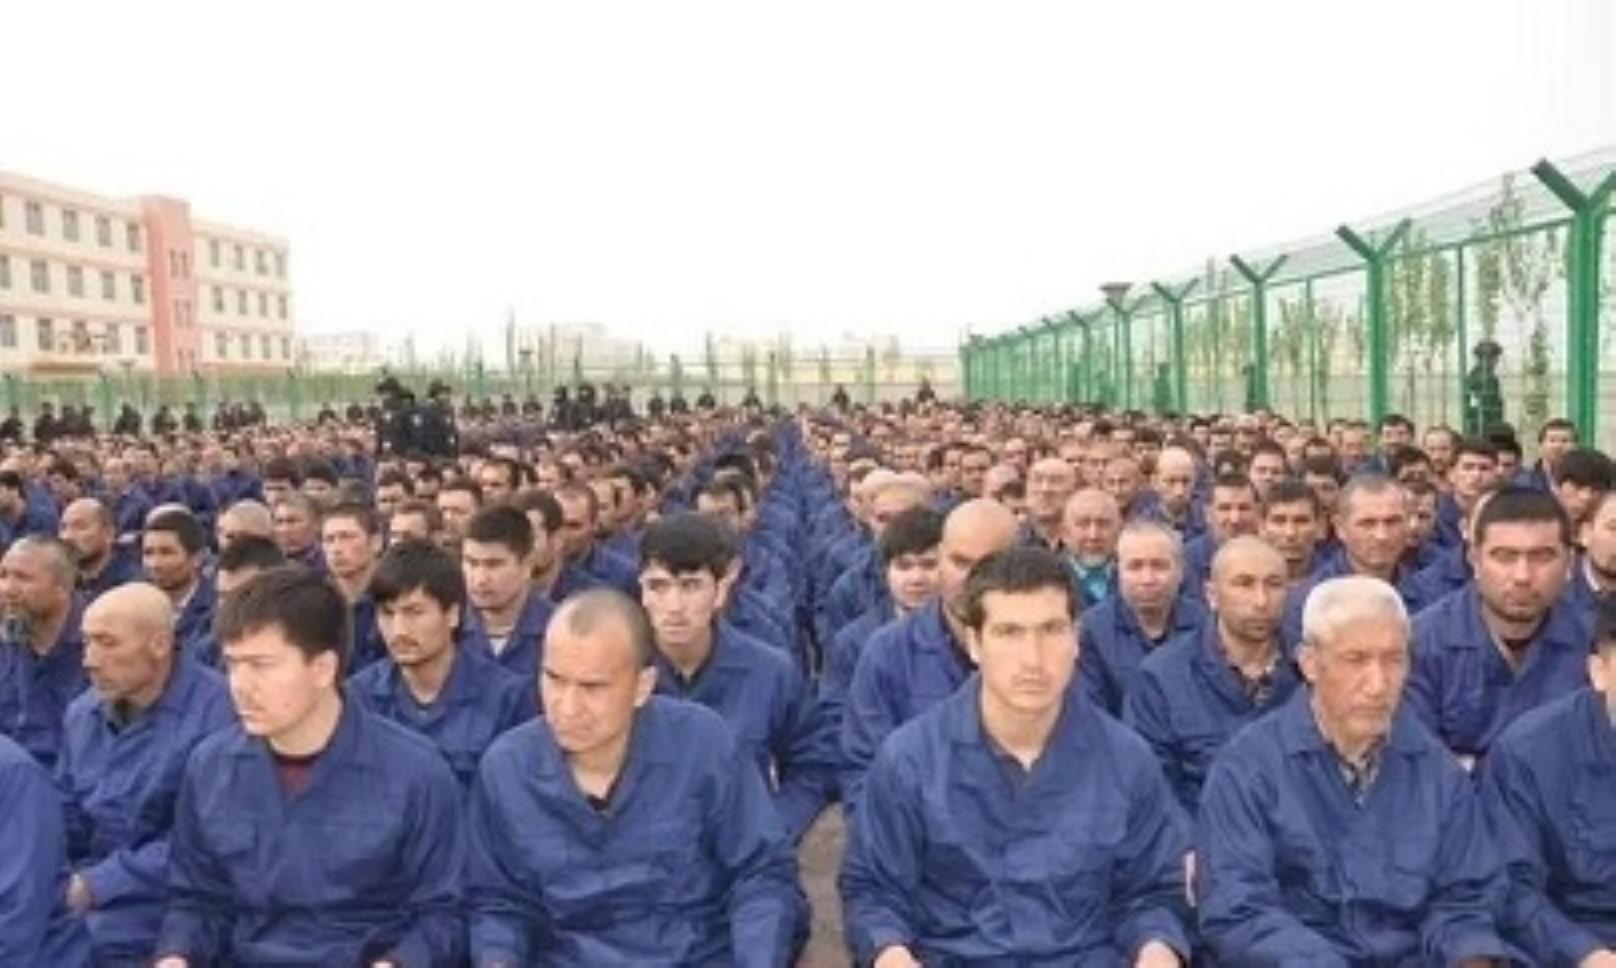 Uyghur men imprisoned at the Lop County #4 Re-Education Camp, Xinjiang, China. They are forced to listen to “de-radicalization” lectures. Photo: Weixin